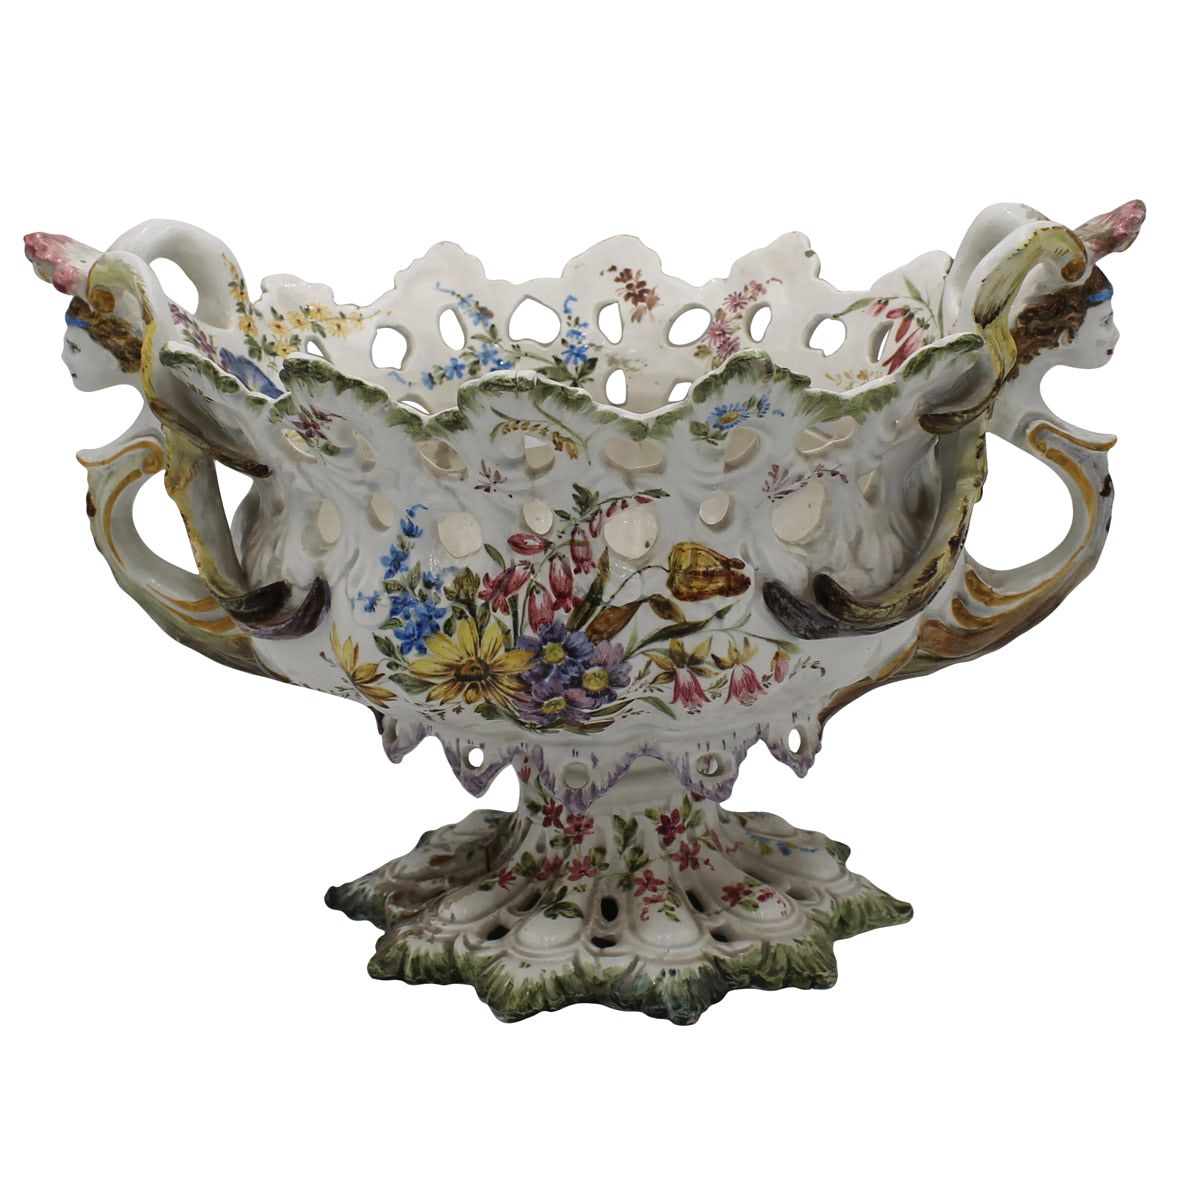 CENTROTAVOLA - CENTERPIECE Polychrome ceramic decorated with floral motifs with &hellip;